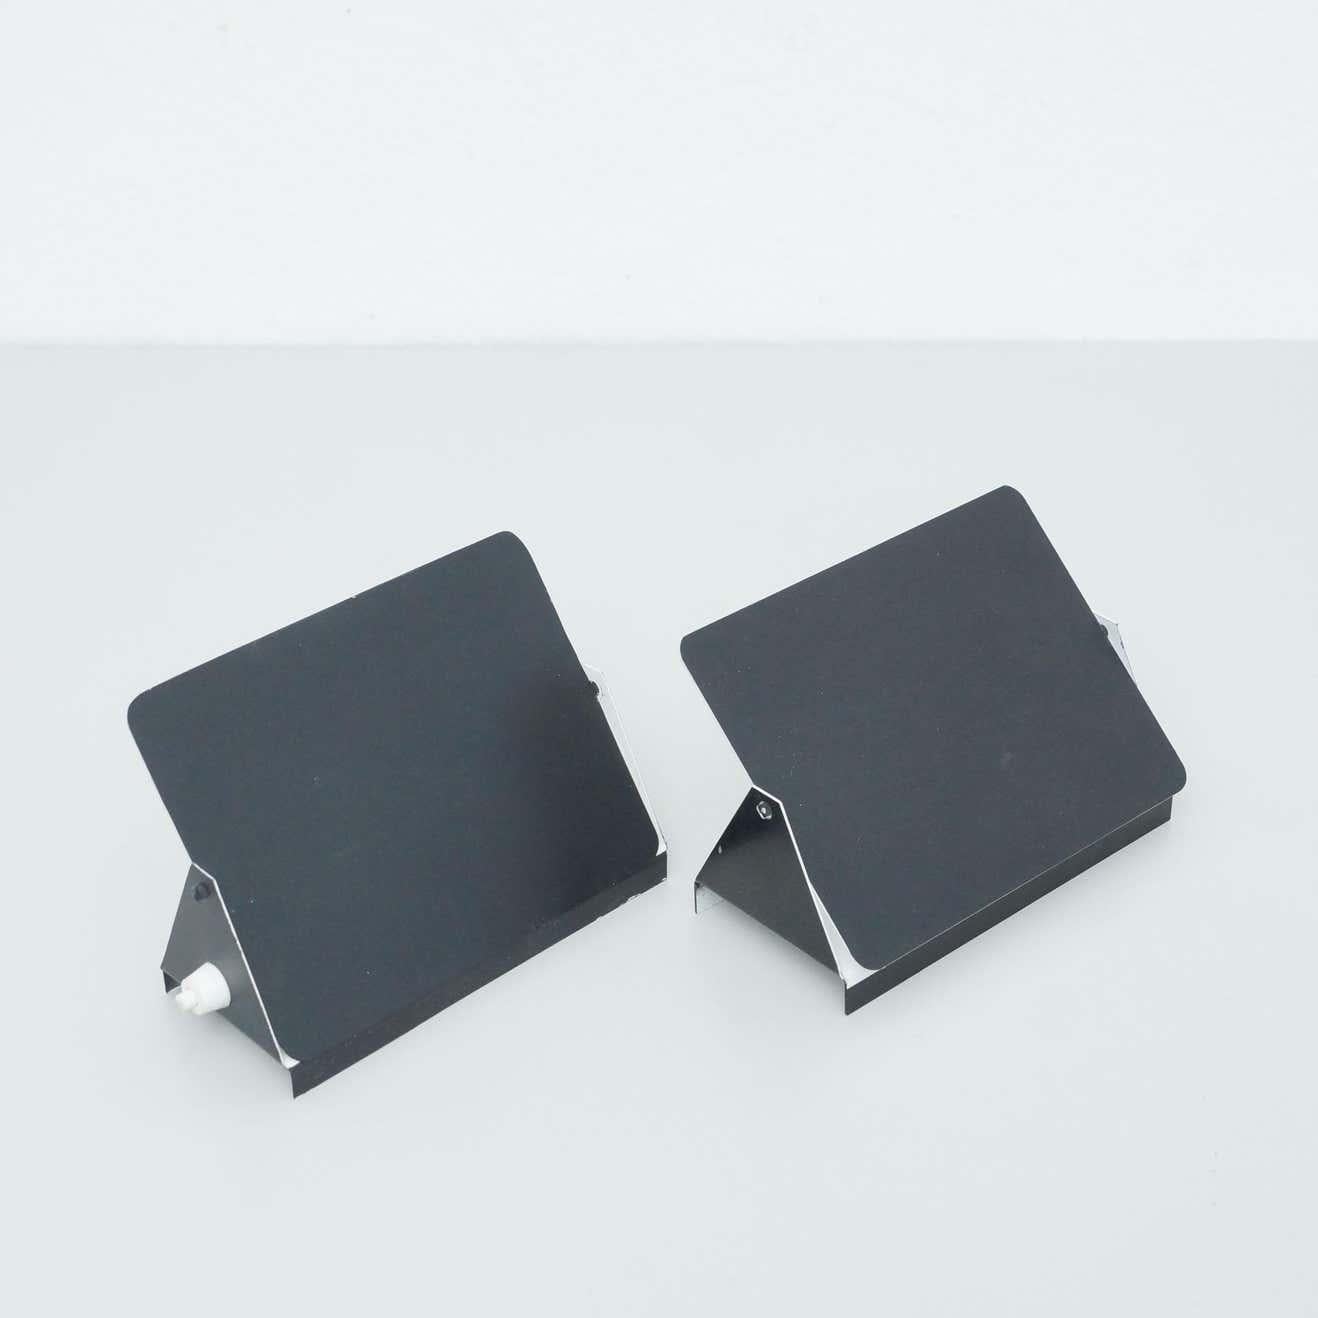 Pair of Charlotte Perriand Mid-Century Modern Black Metal CP-1 Wall Light, 1960 For Sale 6